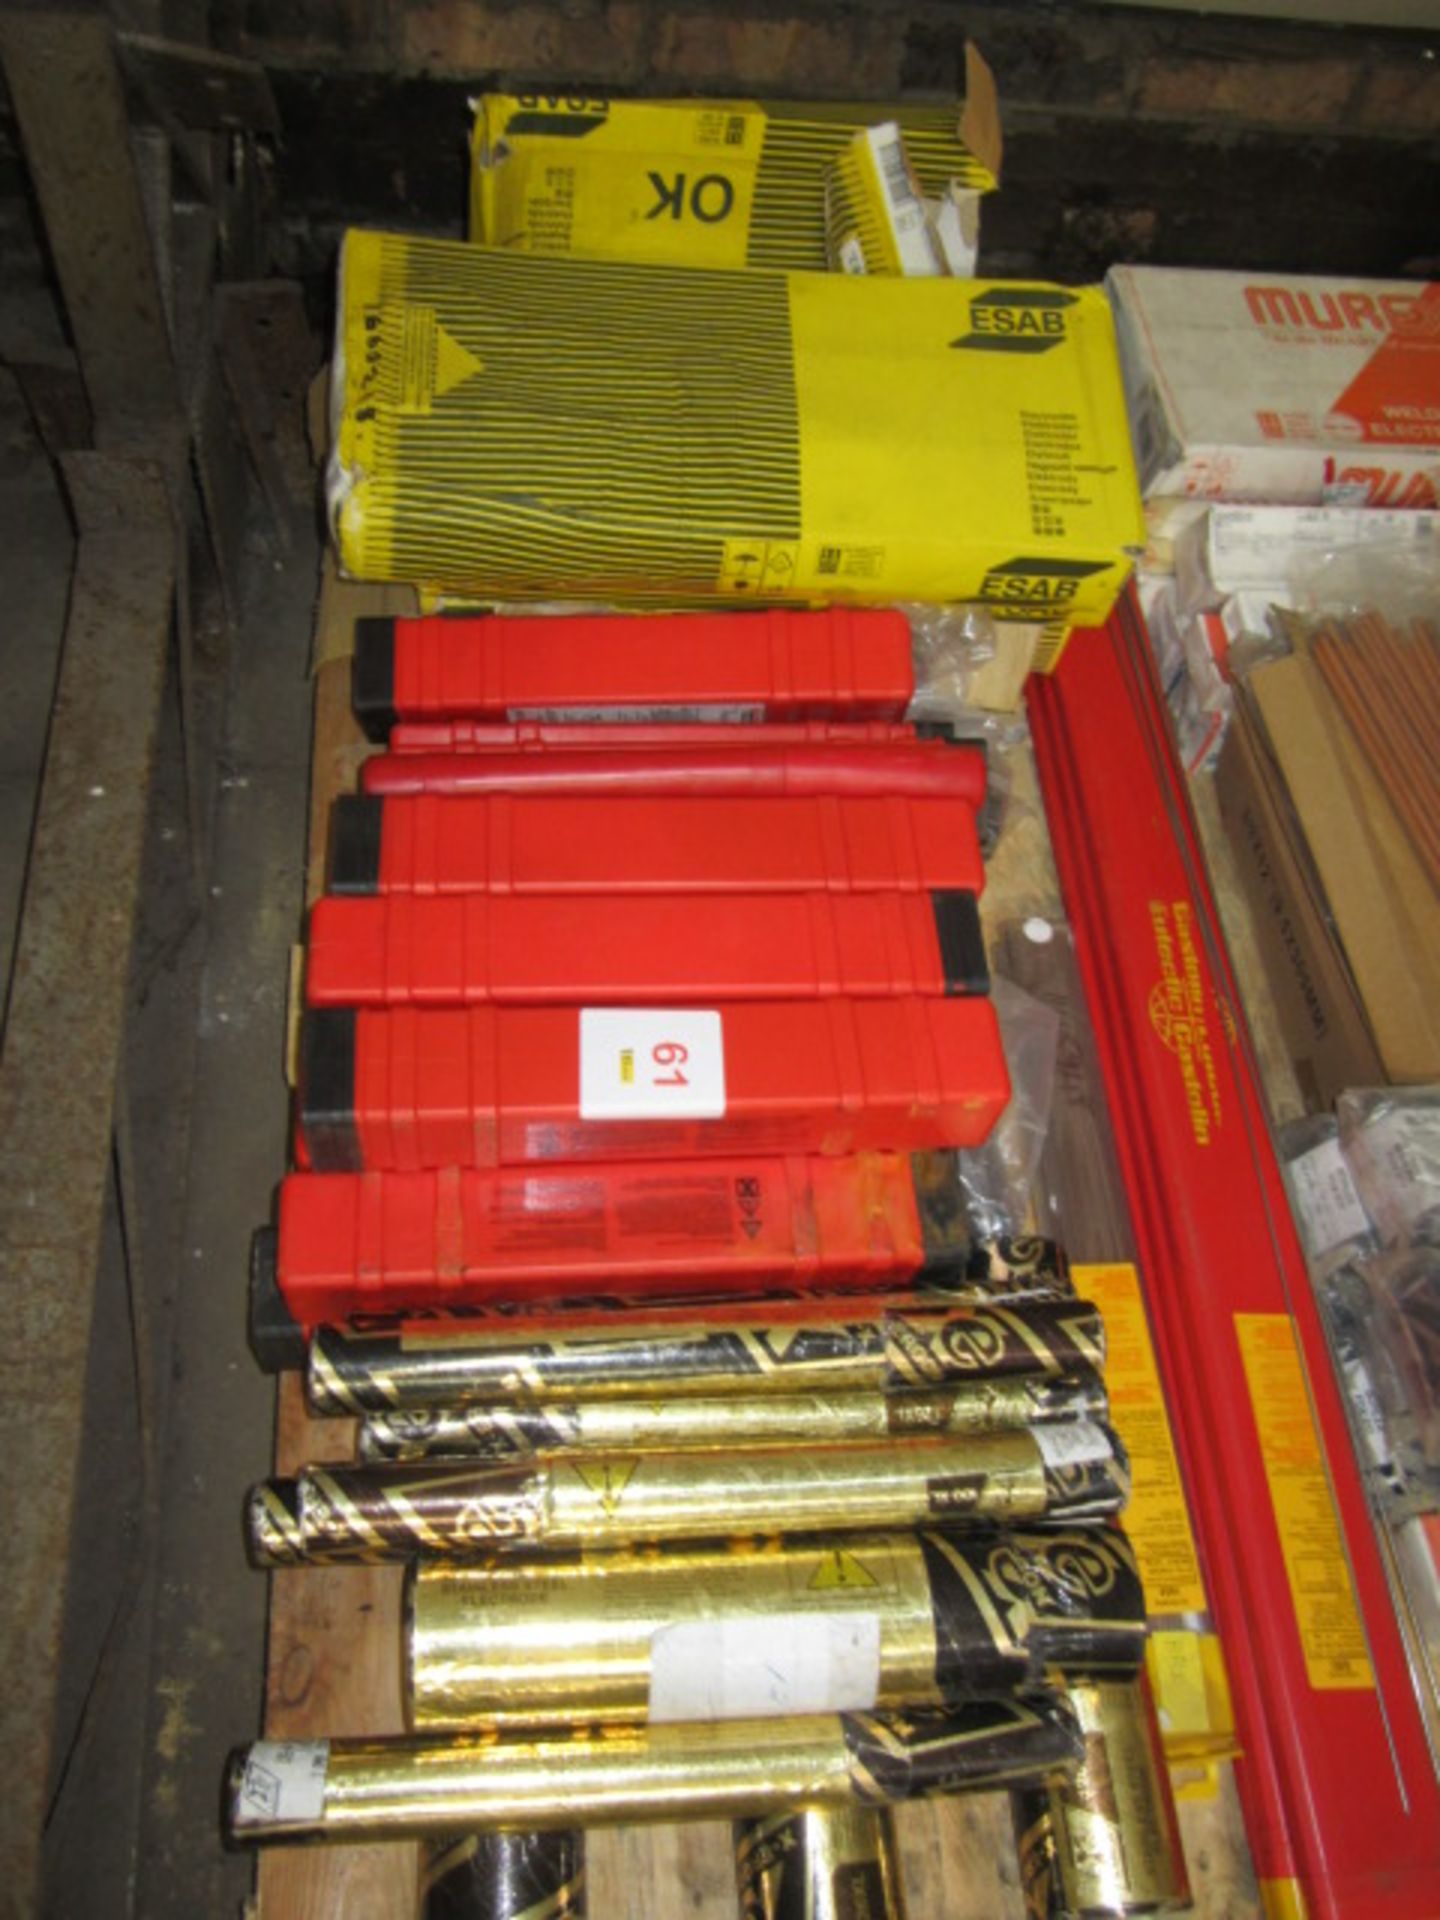 Pallet of welding electrodes including Murex ESAB, Lincoln electrodes cast iron x-ergon stainless - Image 3 of 3